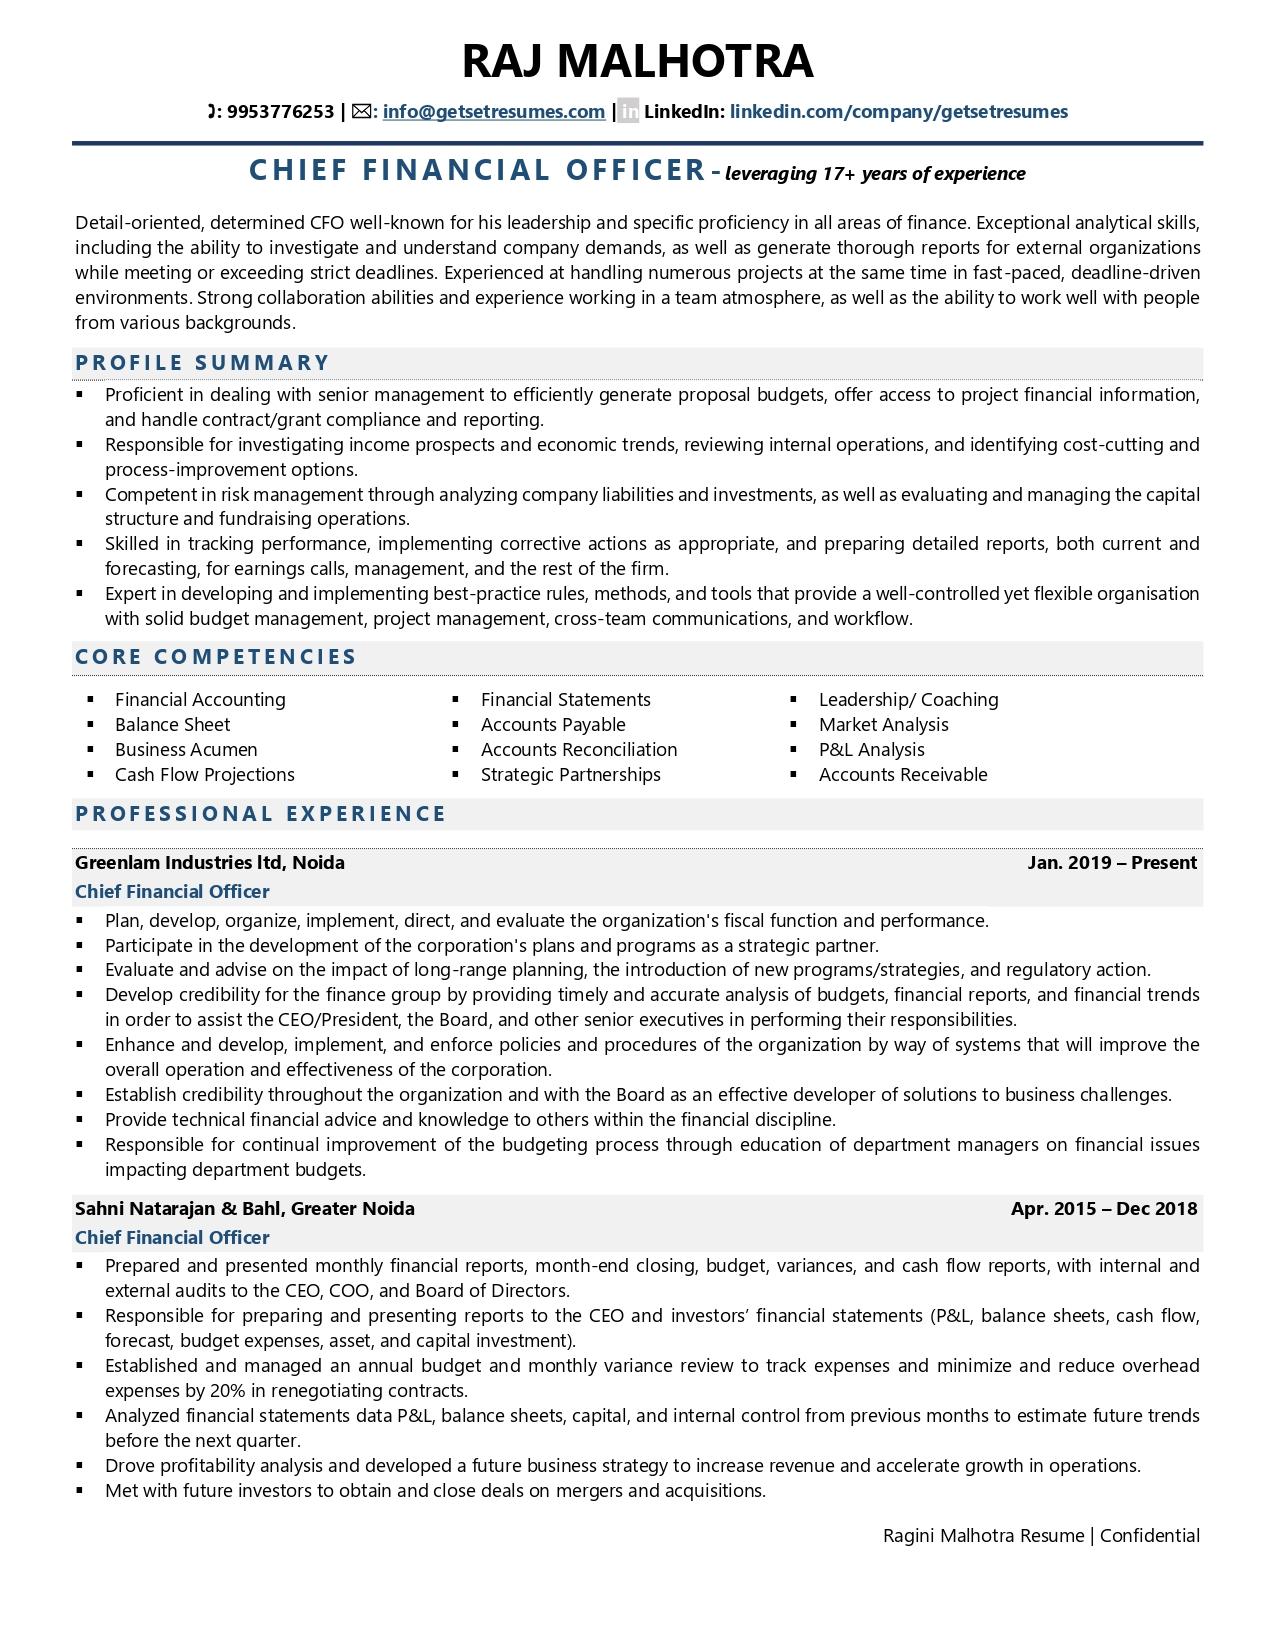 Chief Finance Officer - Resume Example & Template